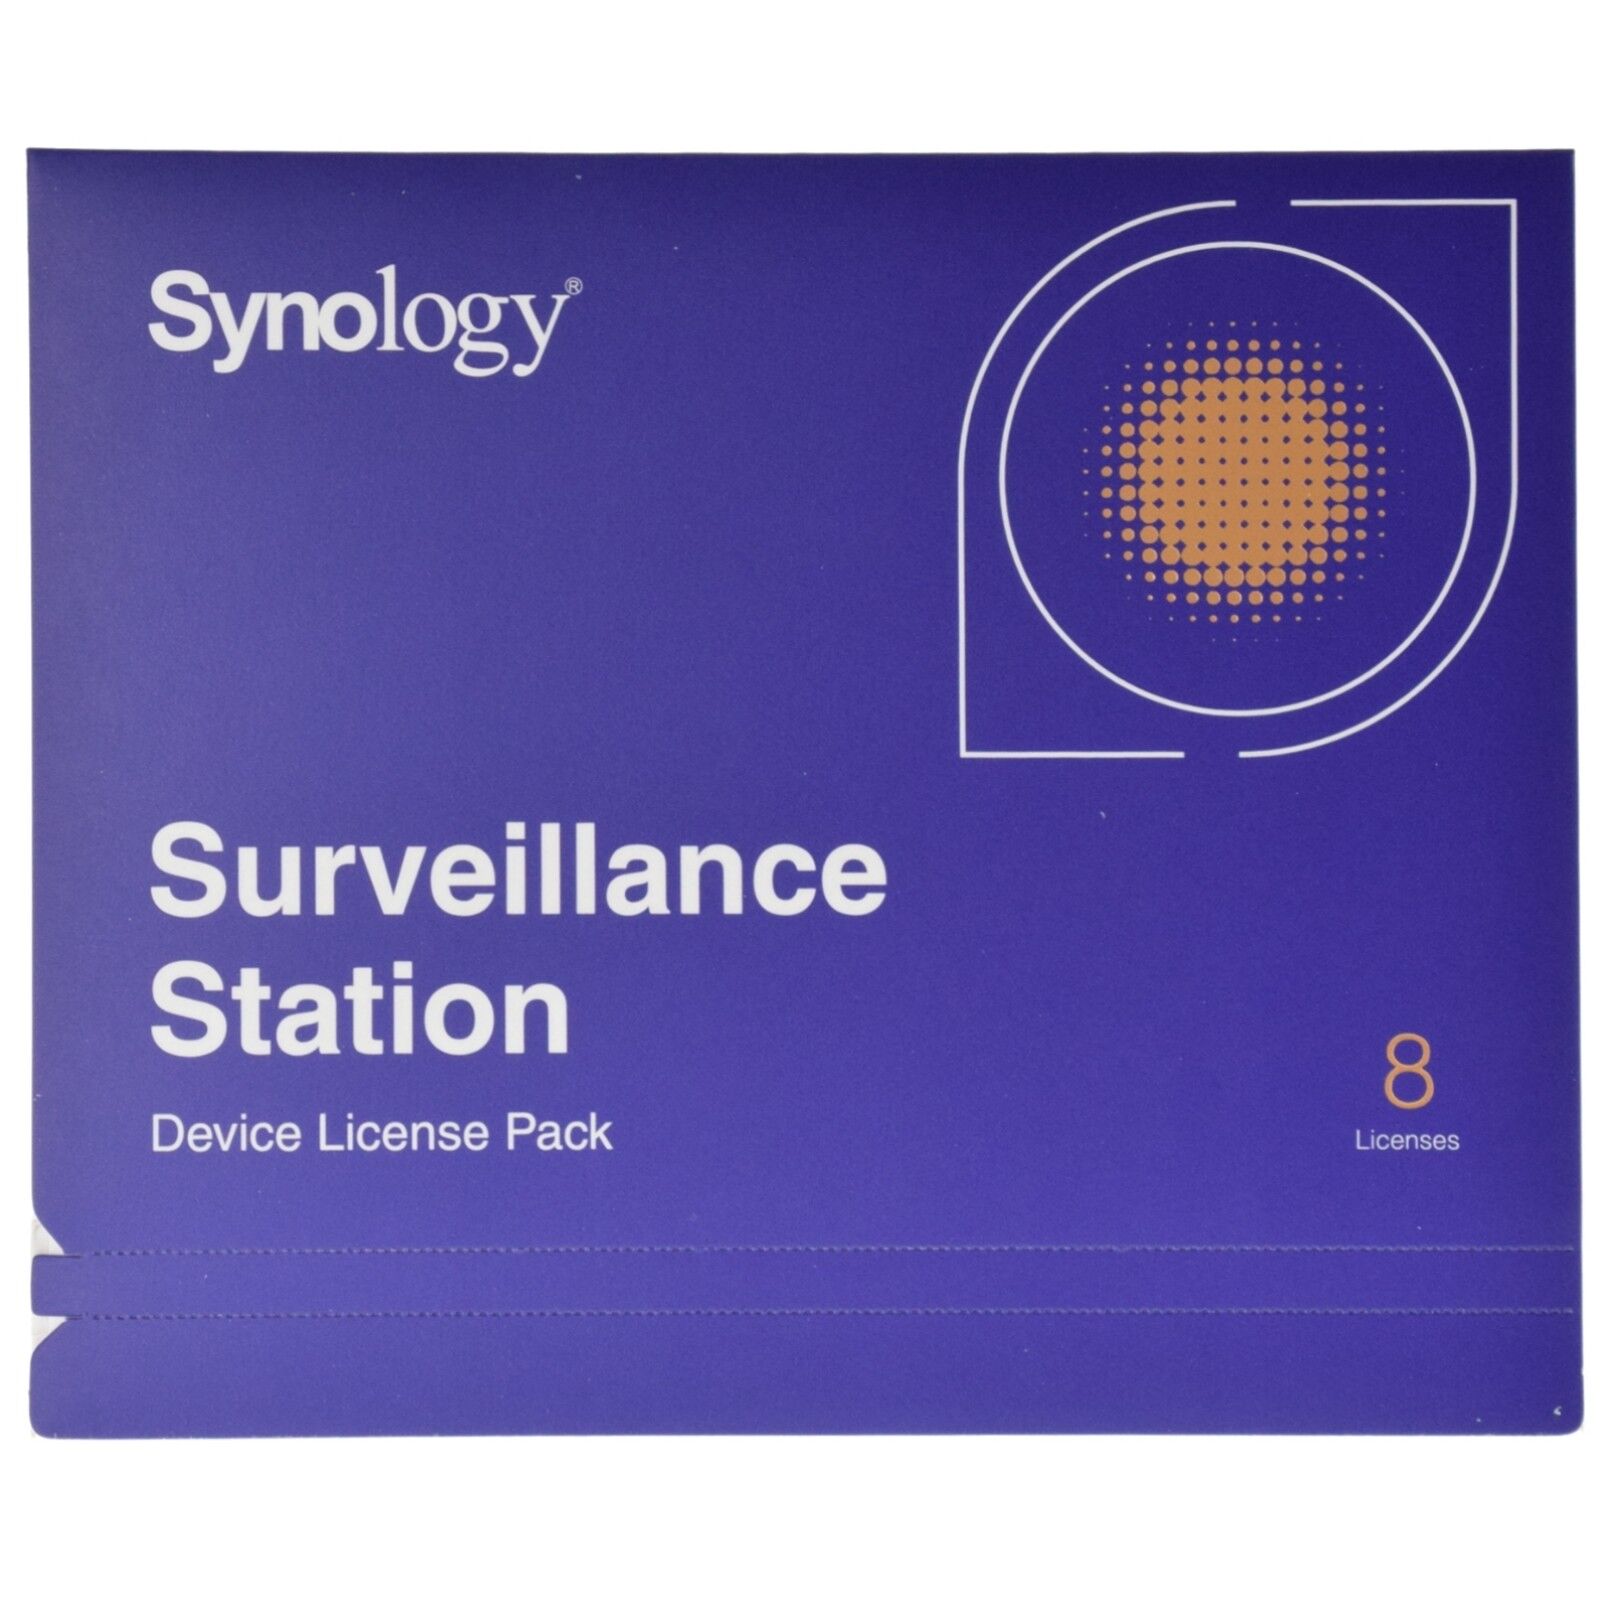 Synology IP Camera 8-License Pack Kit for Surveillance Station - DS418 DS2419+